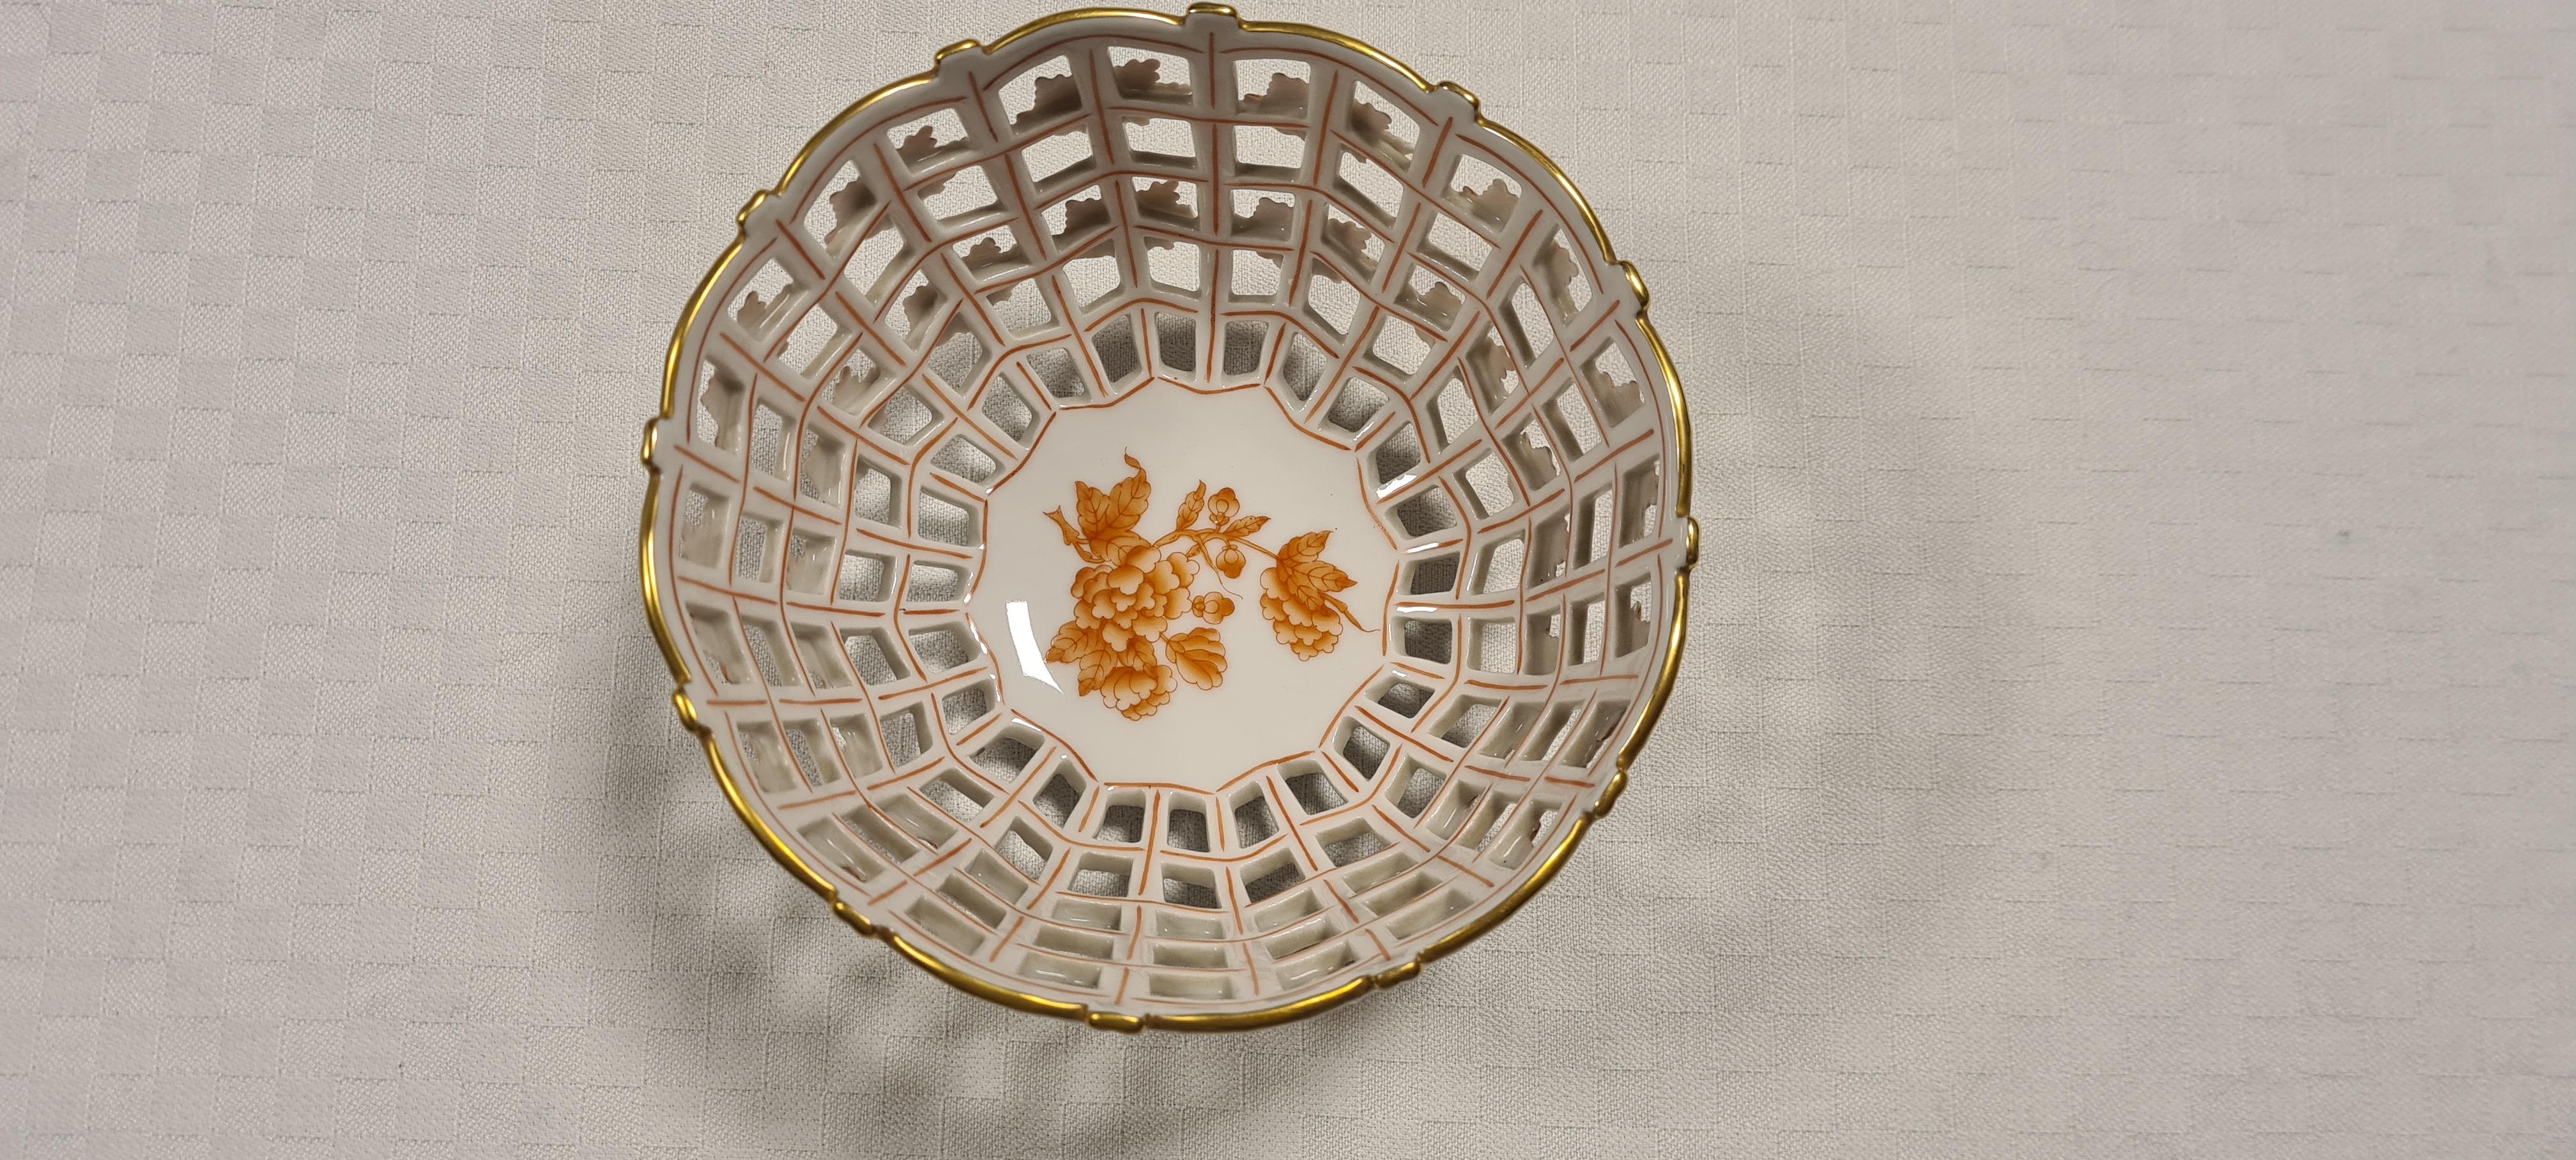 Porcelain basket from Herend Hungary In Excellent Condition For Sale In Torino, IT